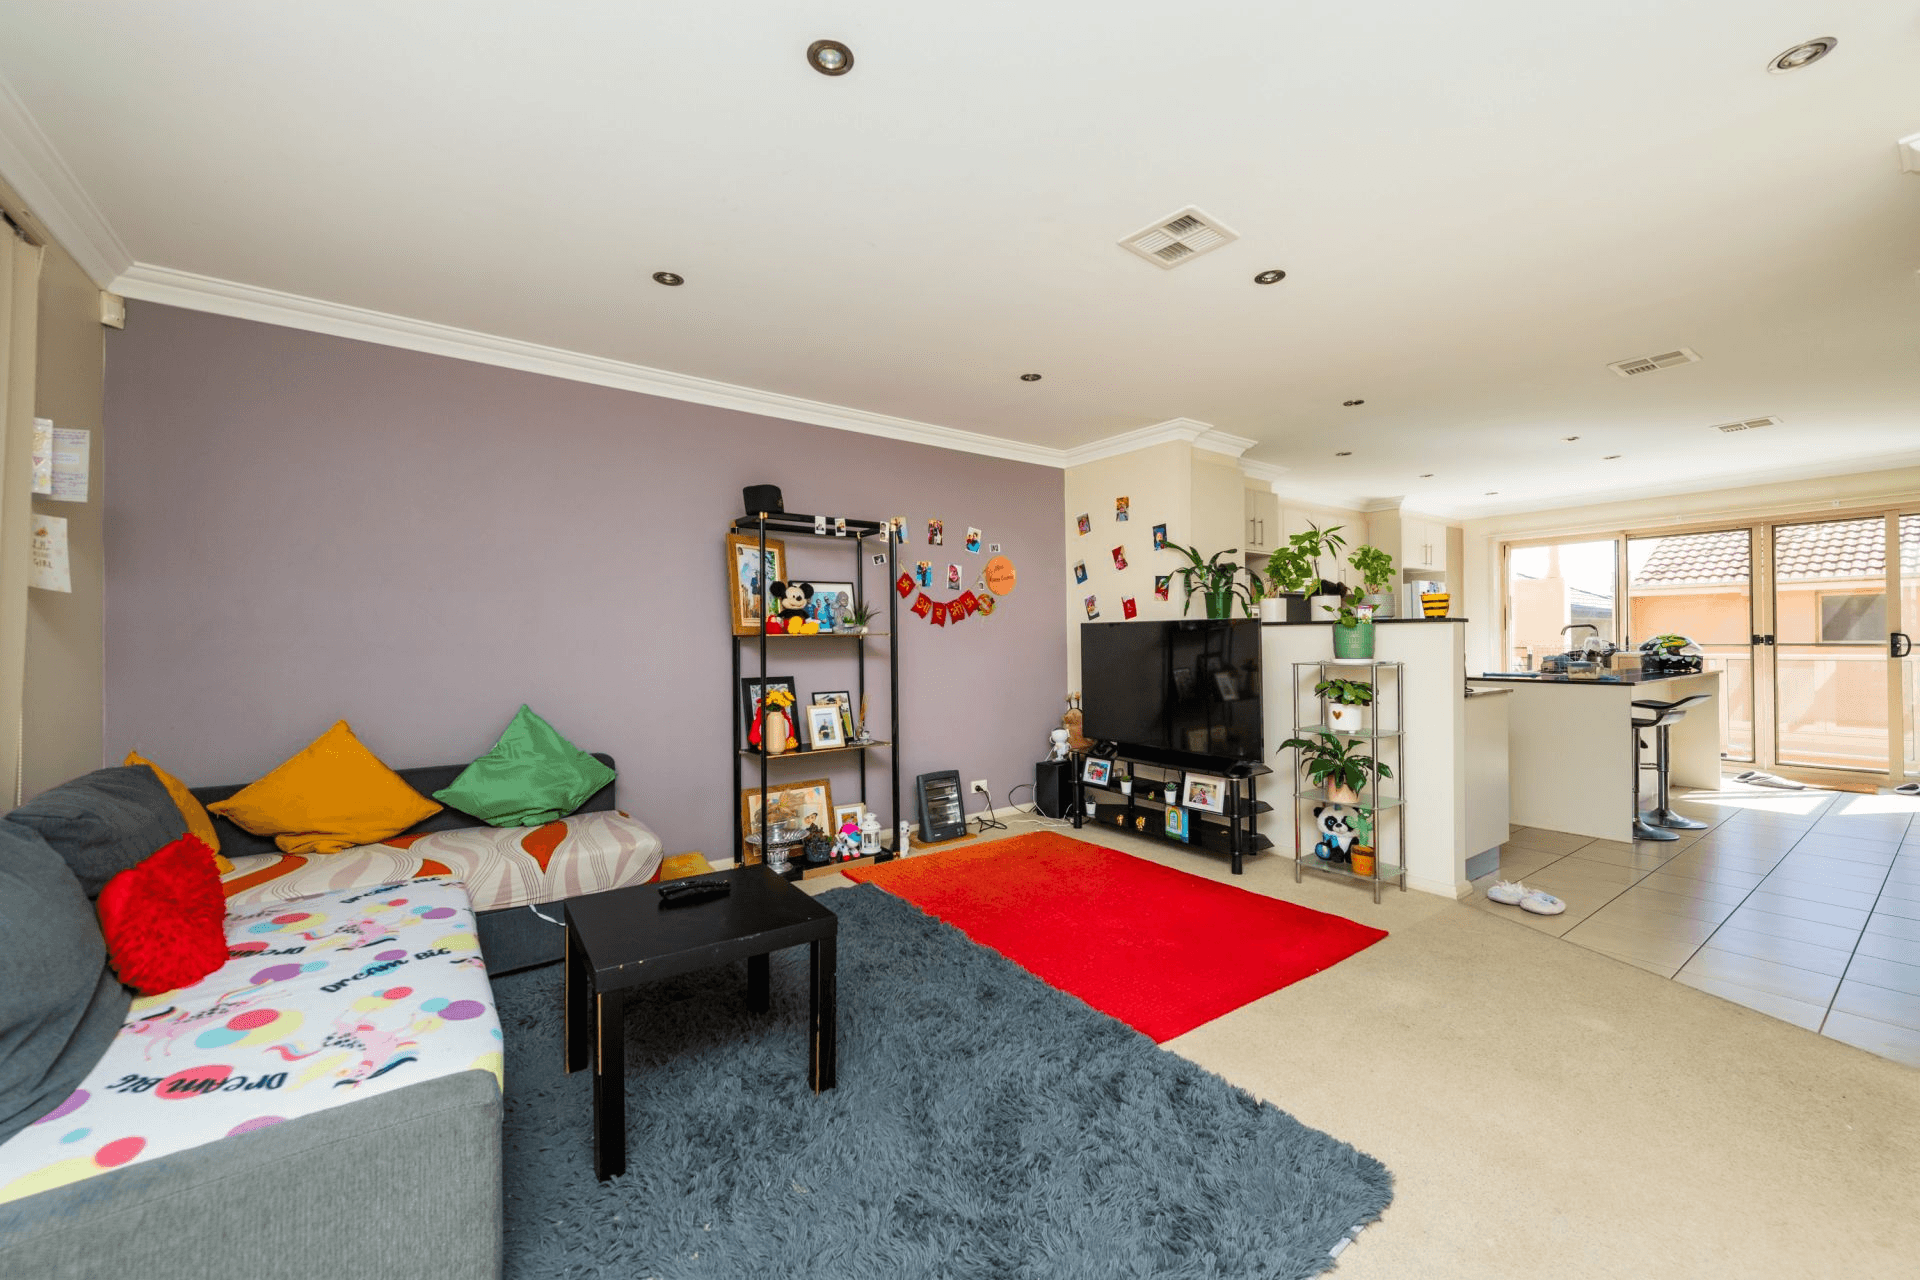 91 Anthony Rolfe Ave, Gungahlin, ACT 2912